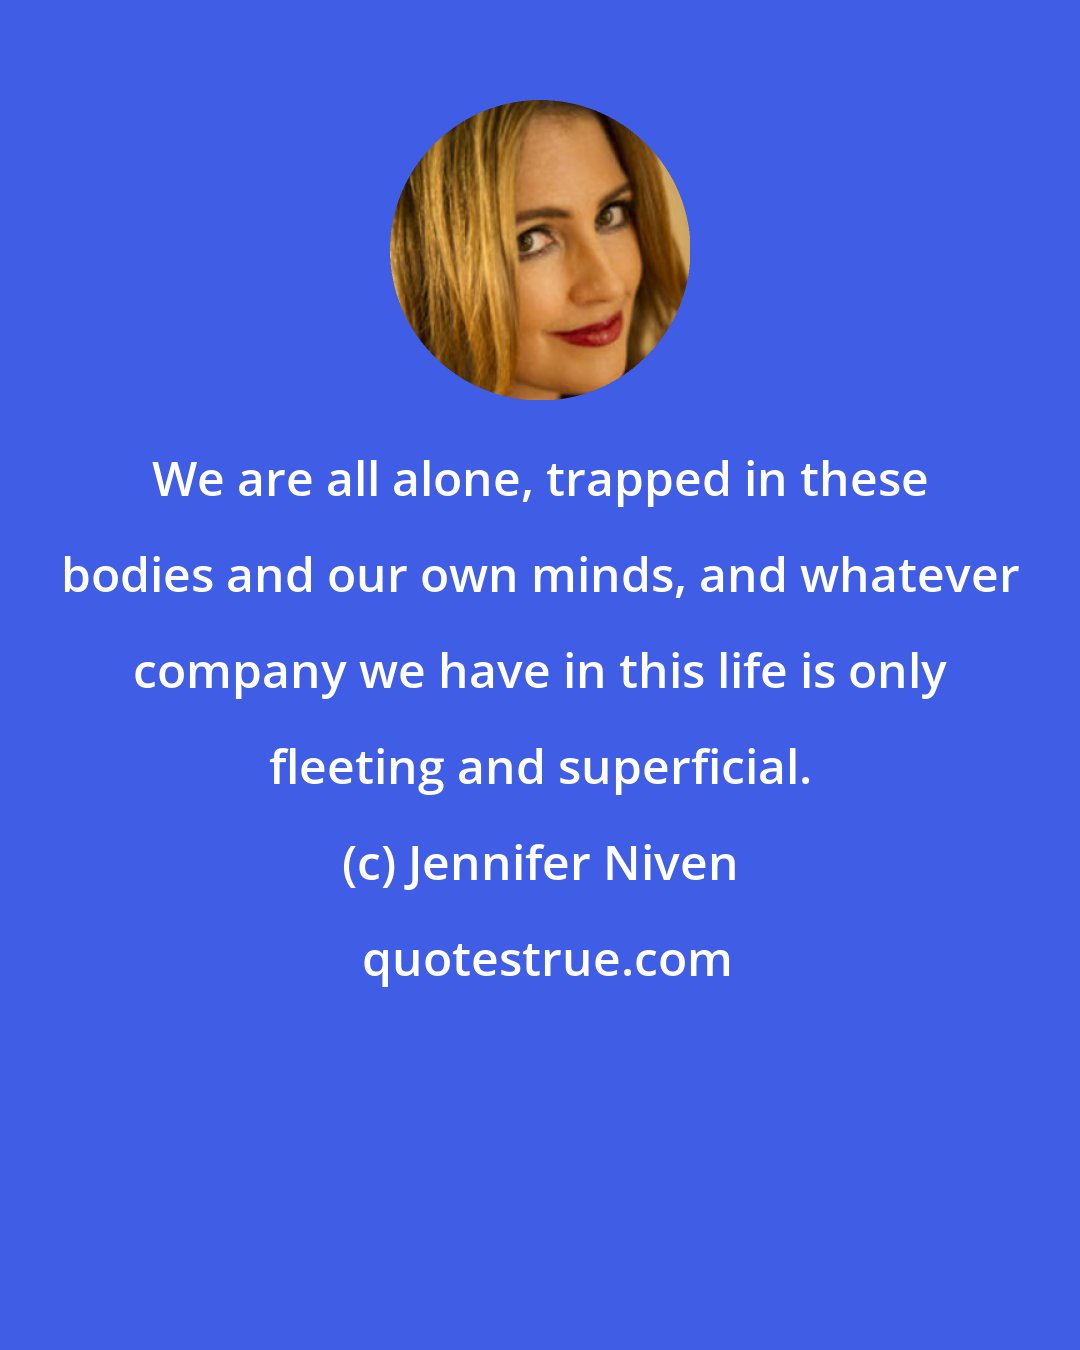 Jennifer Niven: We are all alone, trapped in these bodies and our own minds, and whatever company we have in this life is only fleeting and superficial.